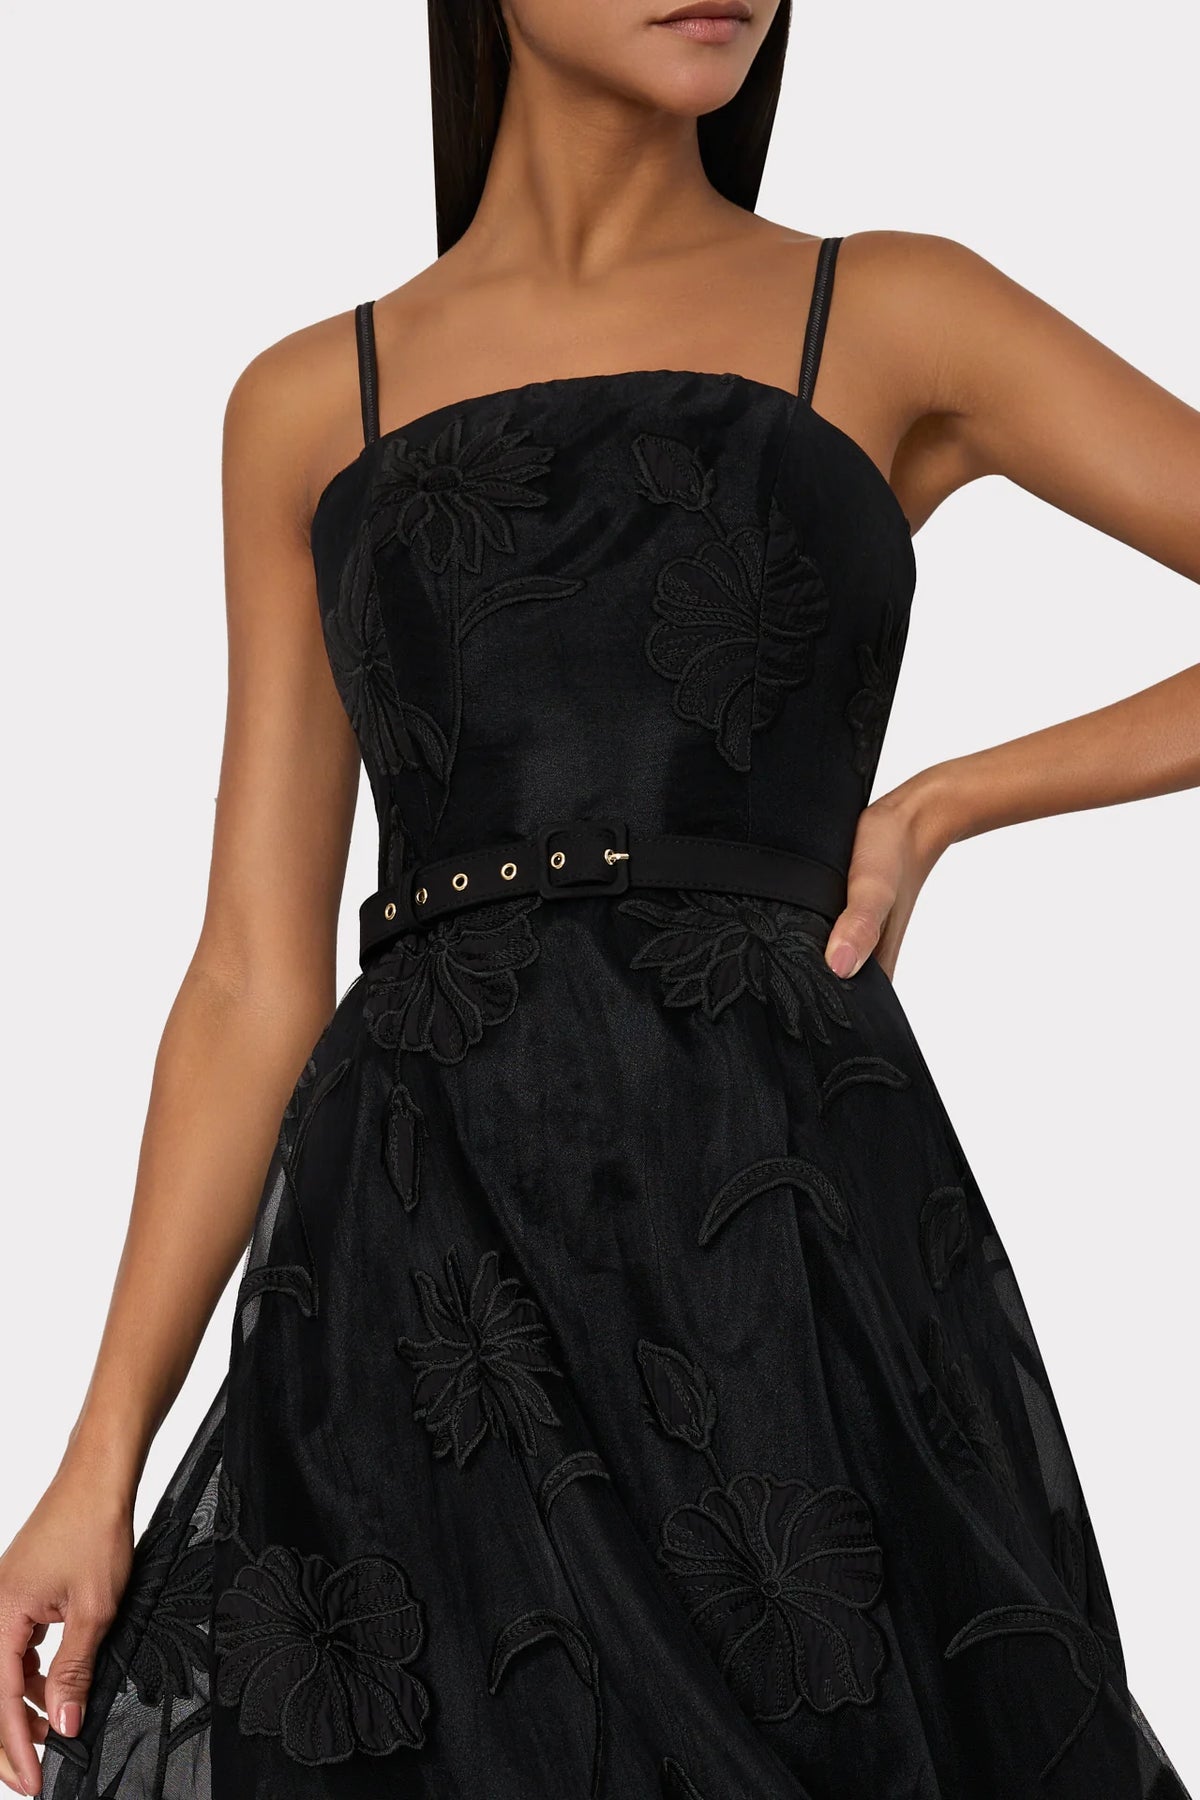 3D Butterfly Embroidered Dress in Black